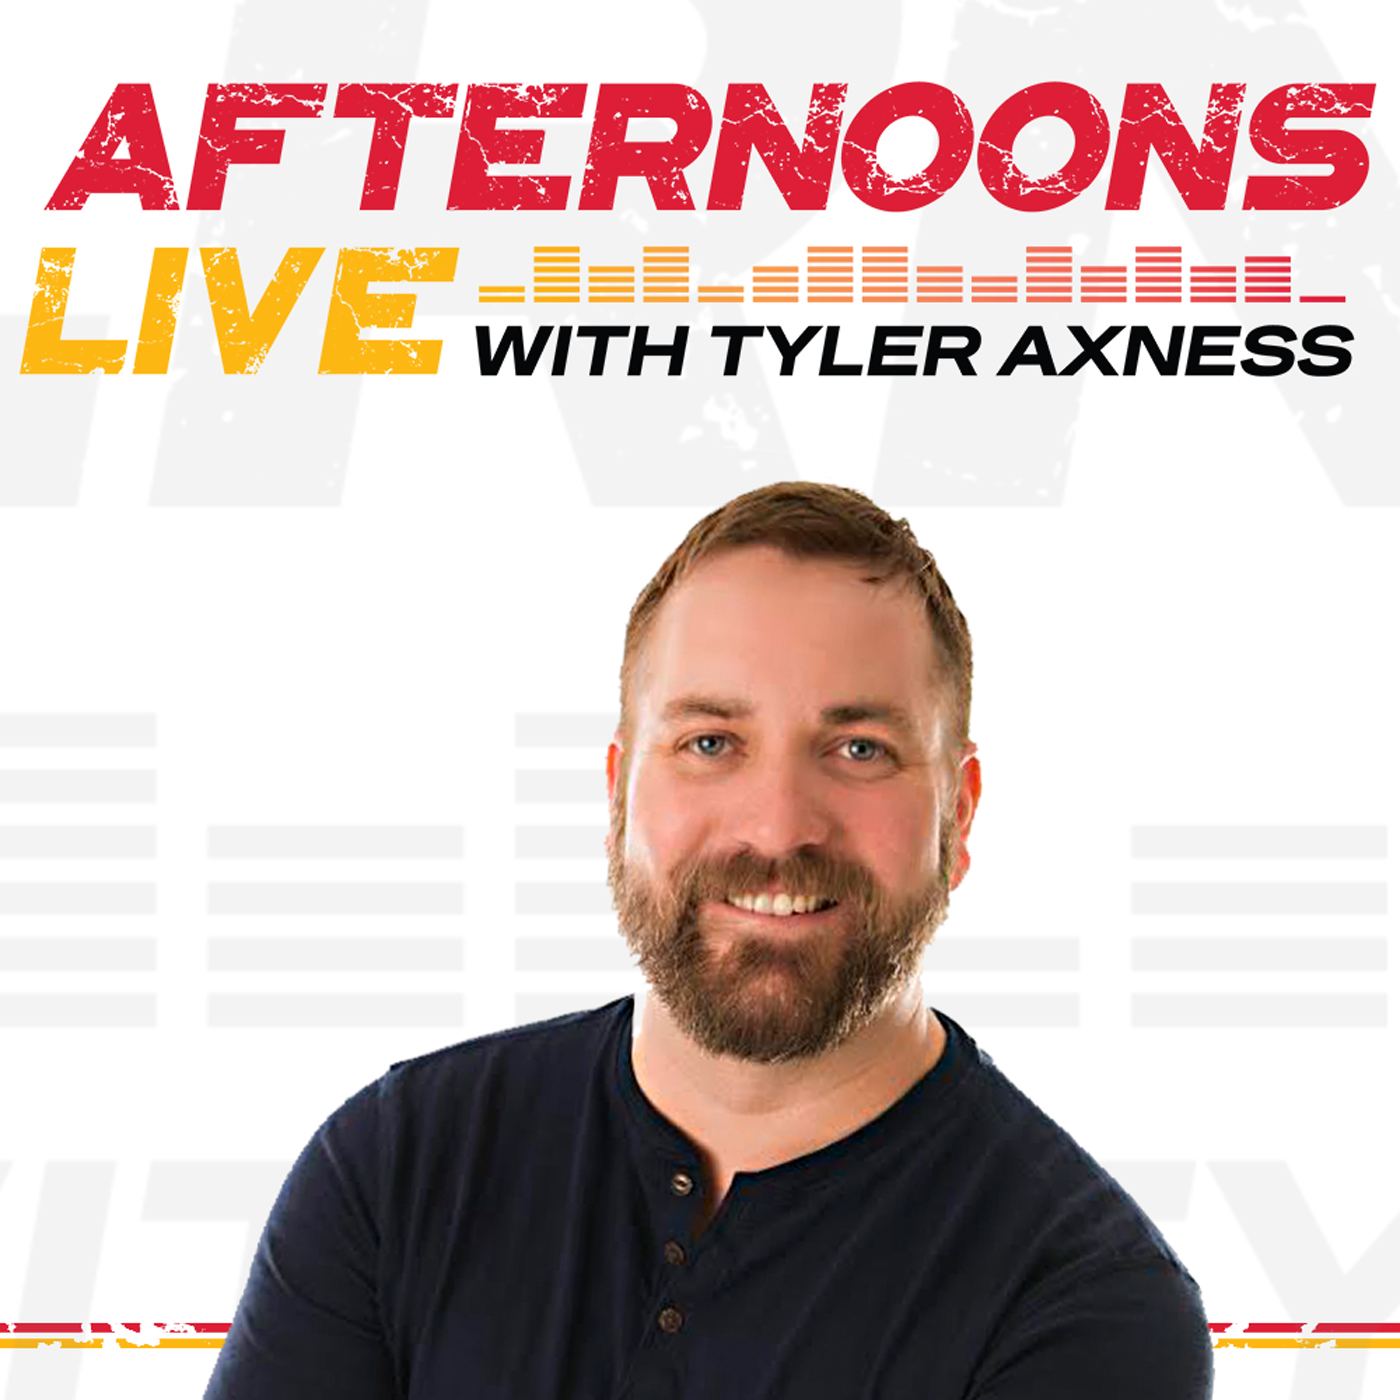 KFGO Afternoons Live with Tyler Axness